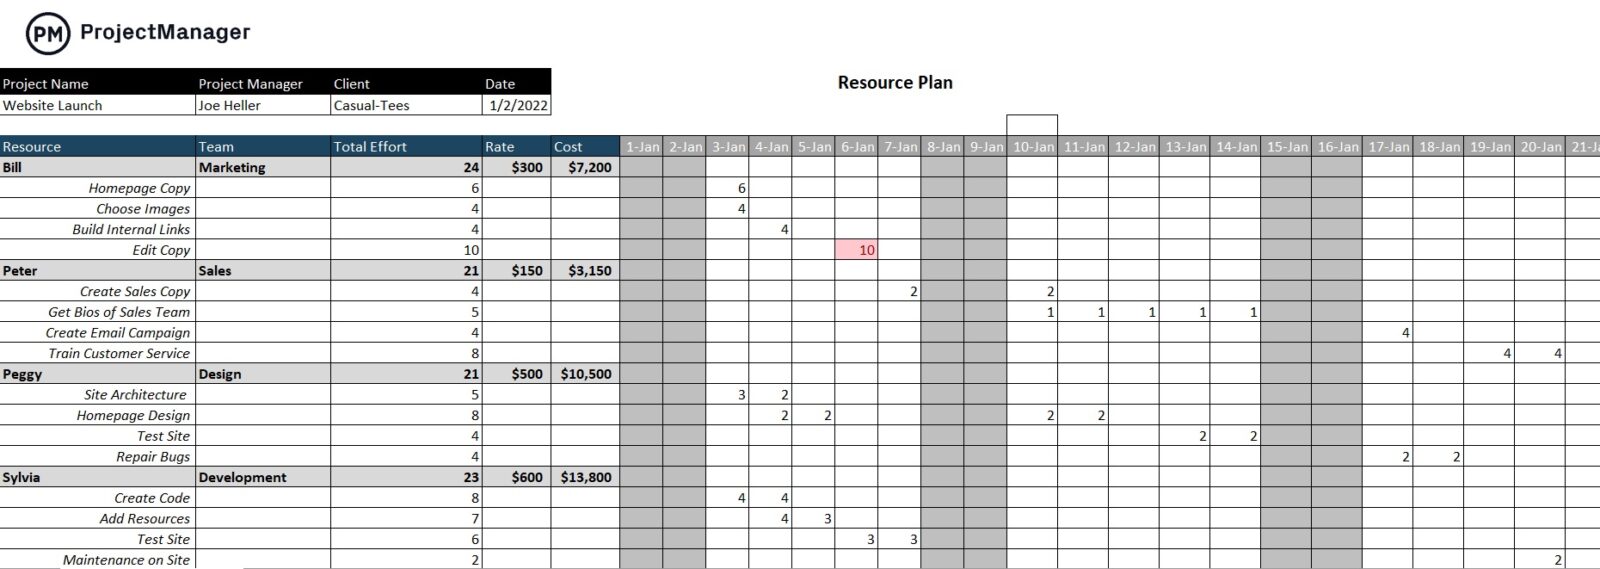 ProjectManager's resource plan template